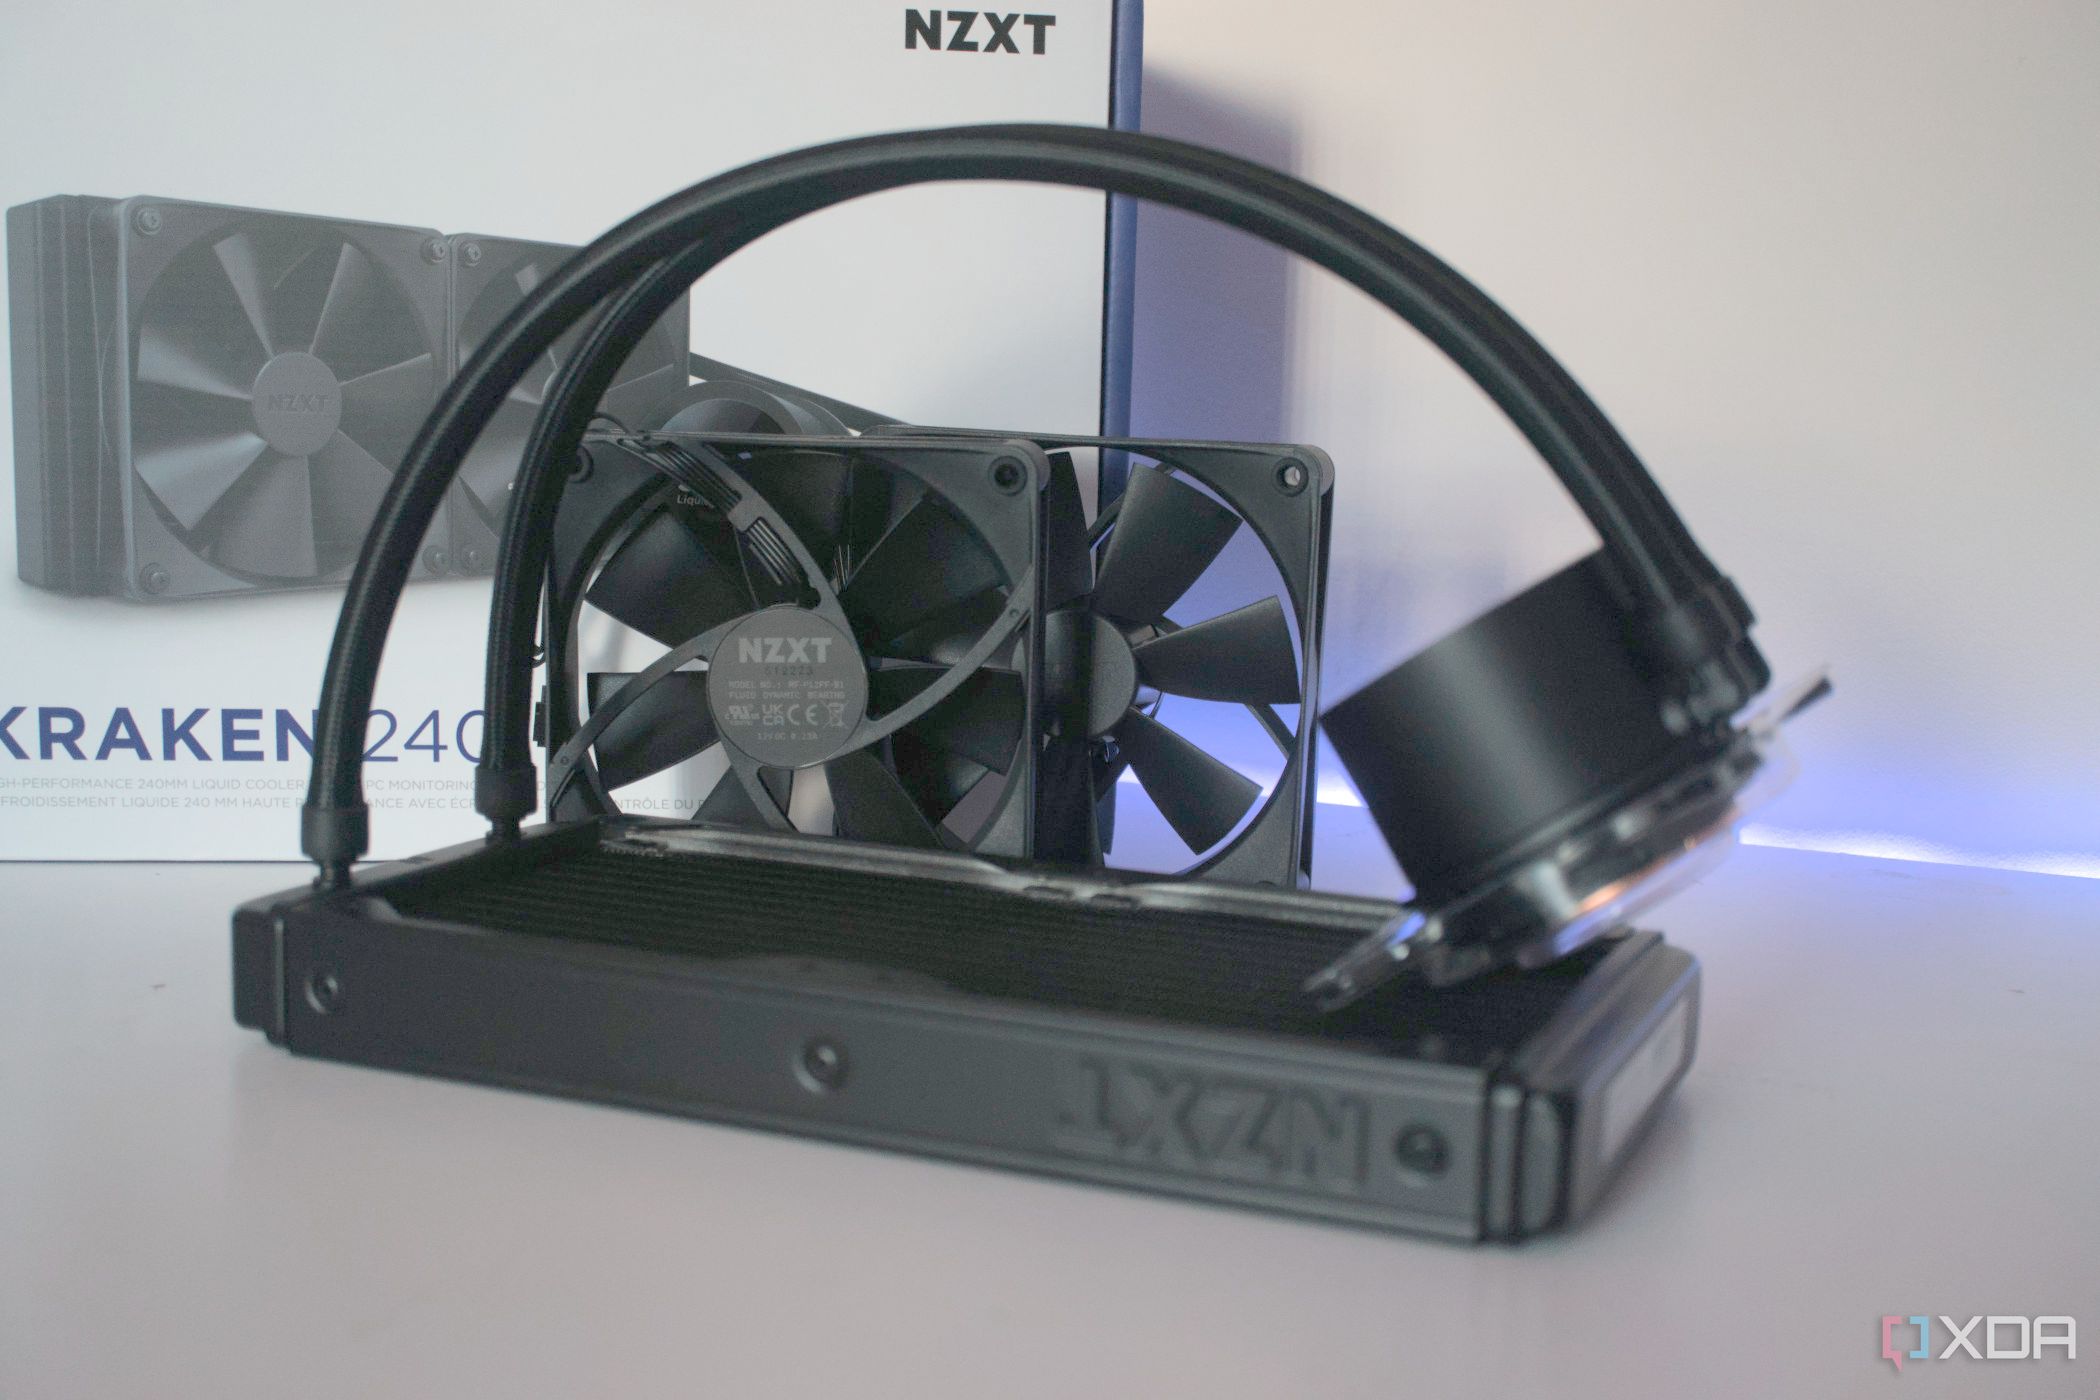 NZXT Kraken 240 review: Impressive price cooling a performance reasonable at